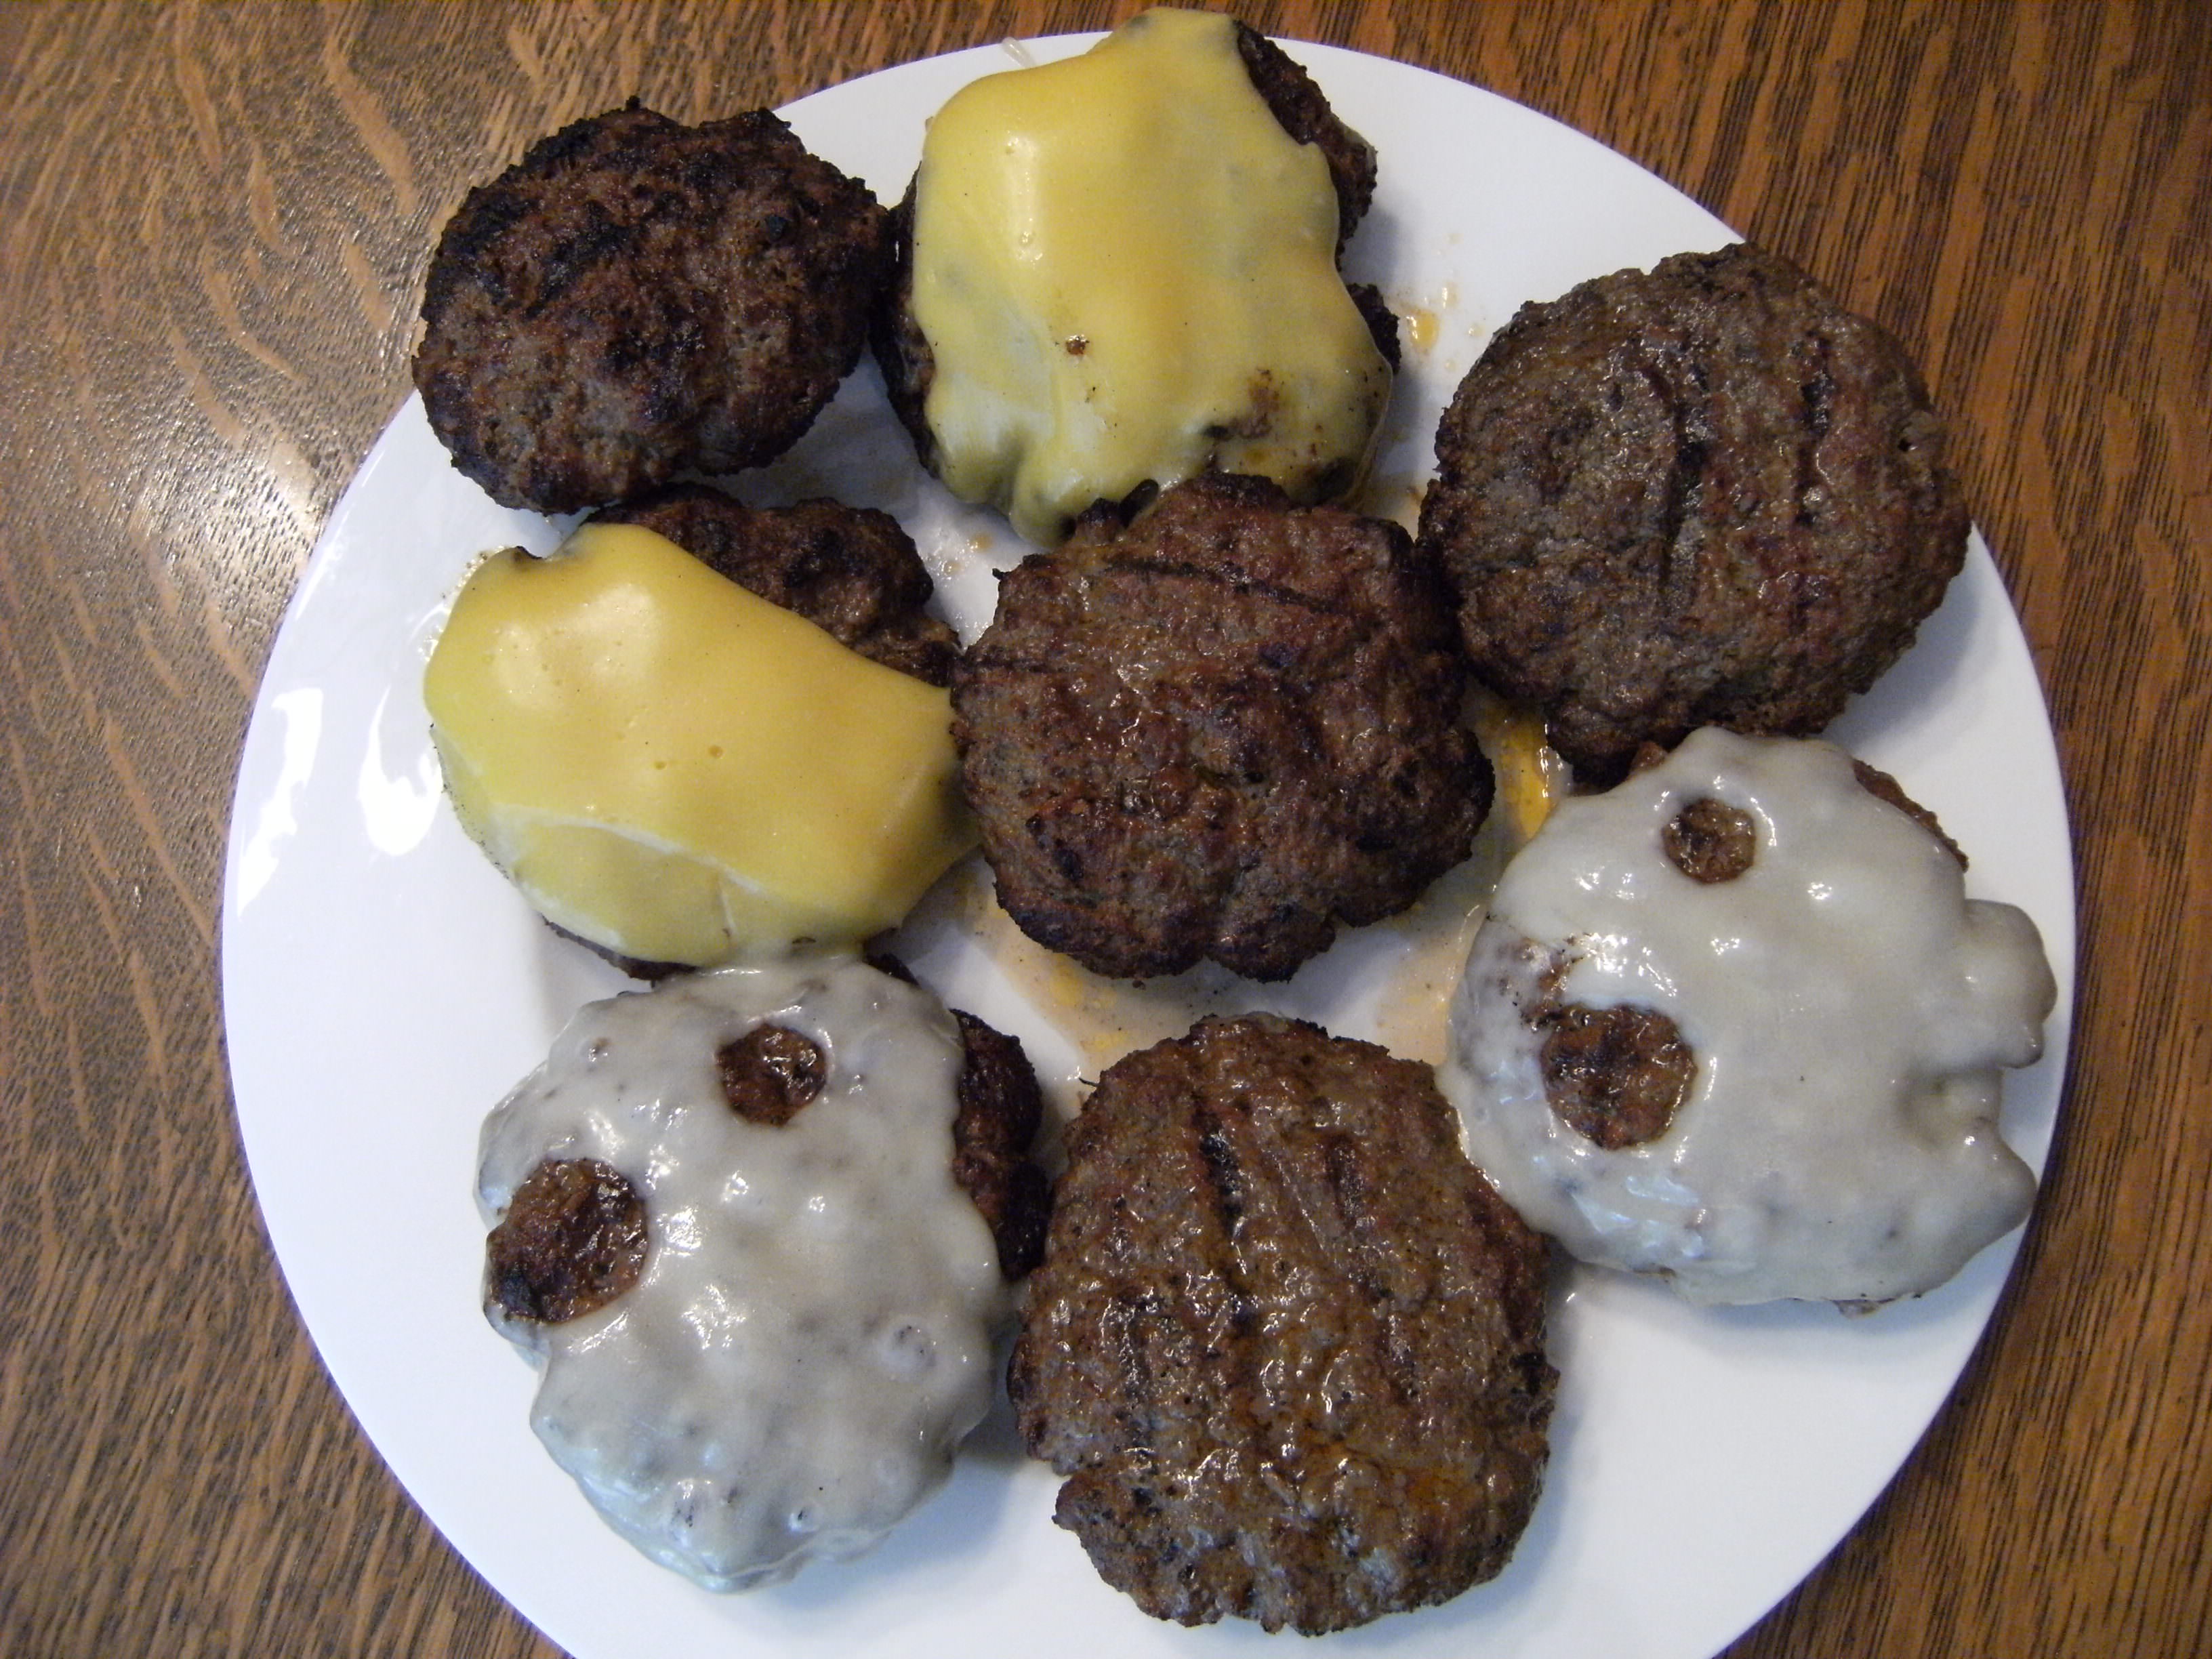 Butter burgers with an assortment of cheeses - Get the recipe for these butter burgers at ComfortablyDomestic.com